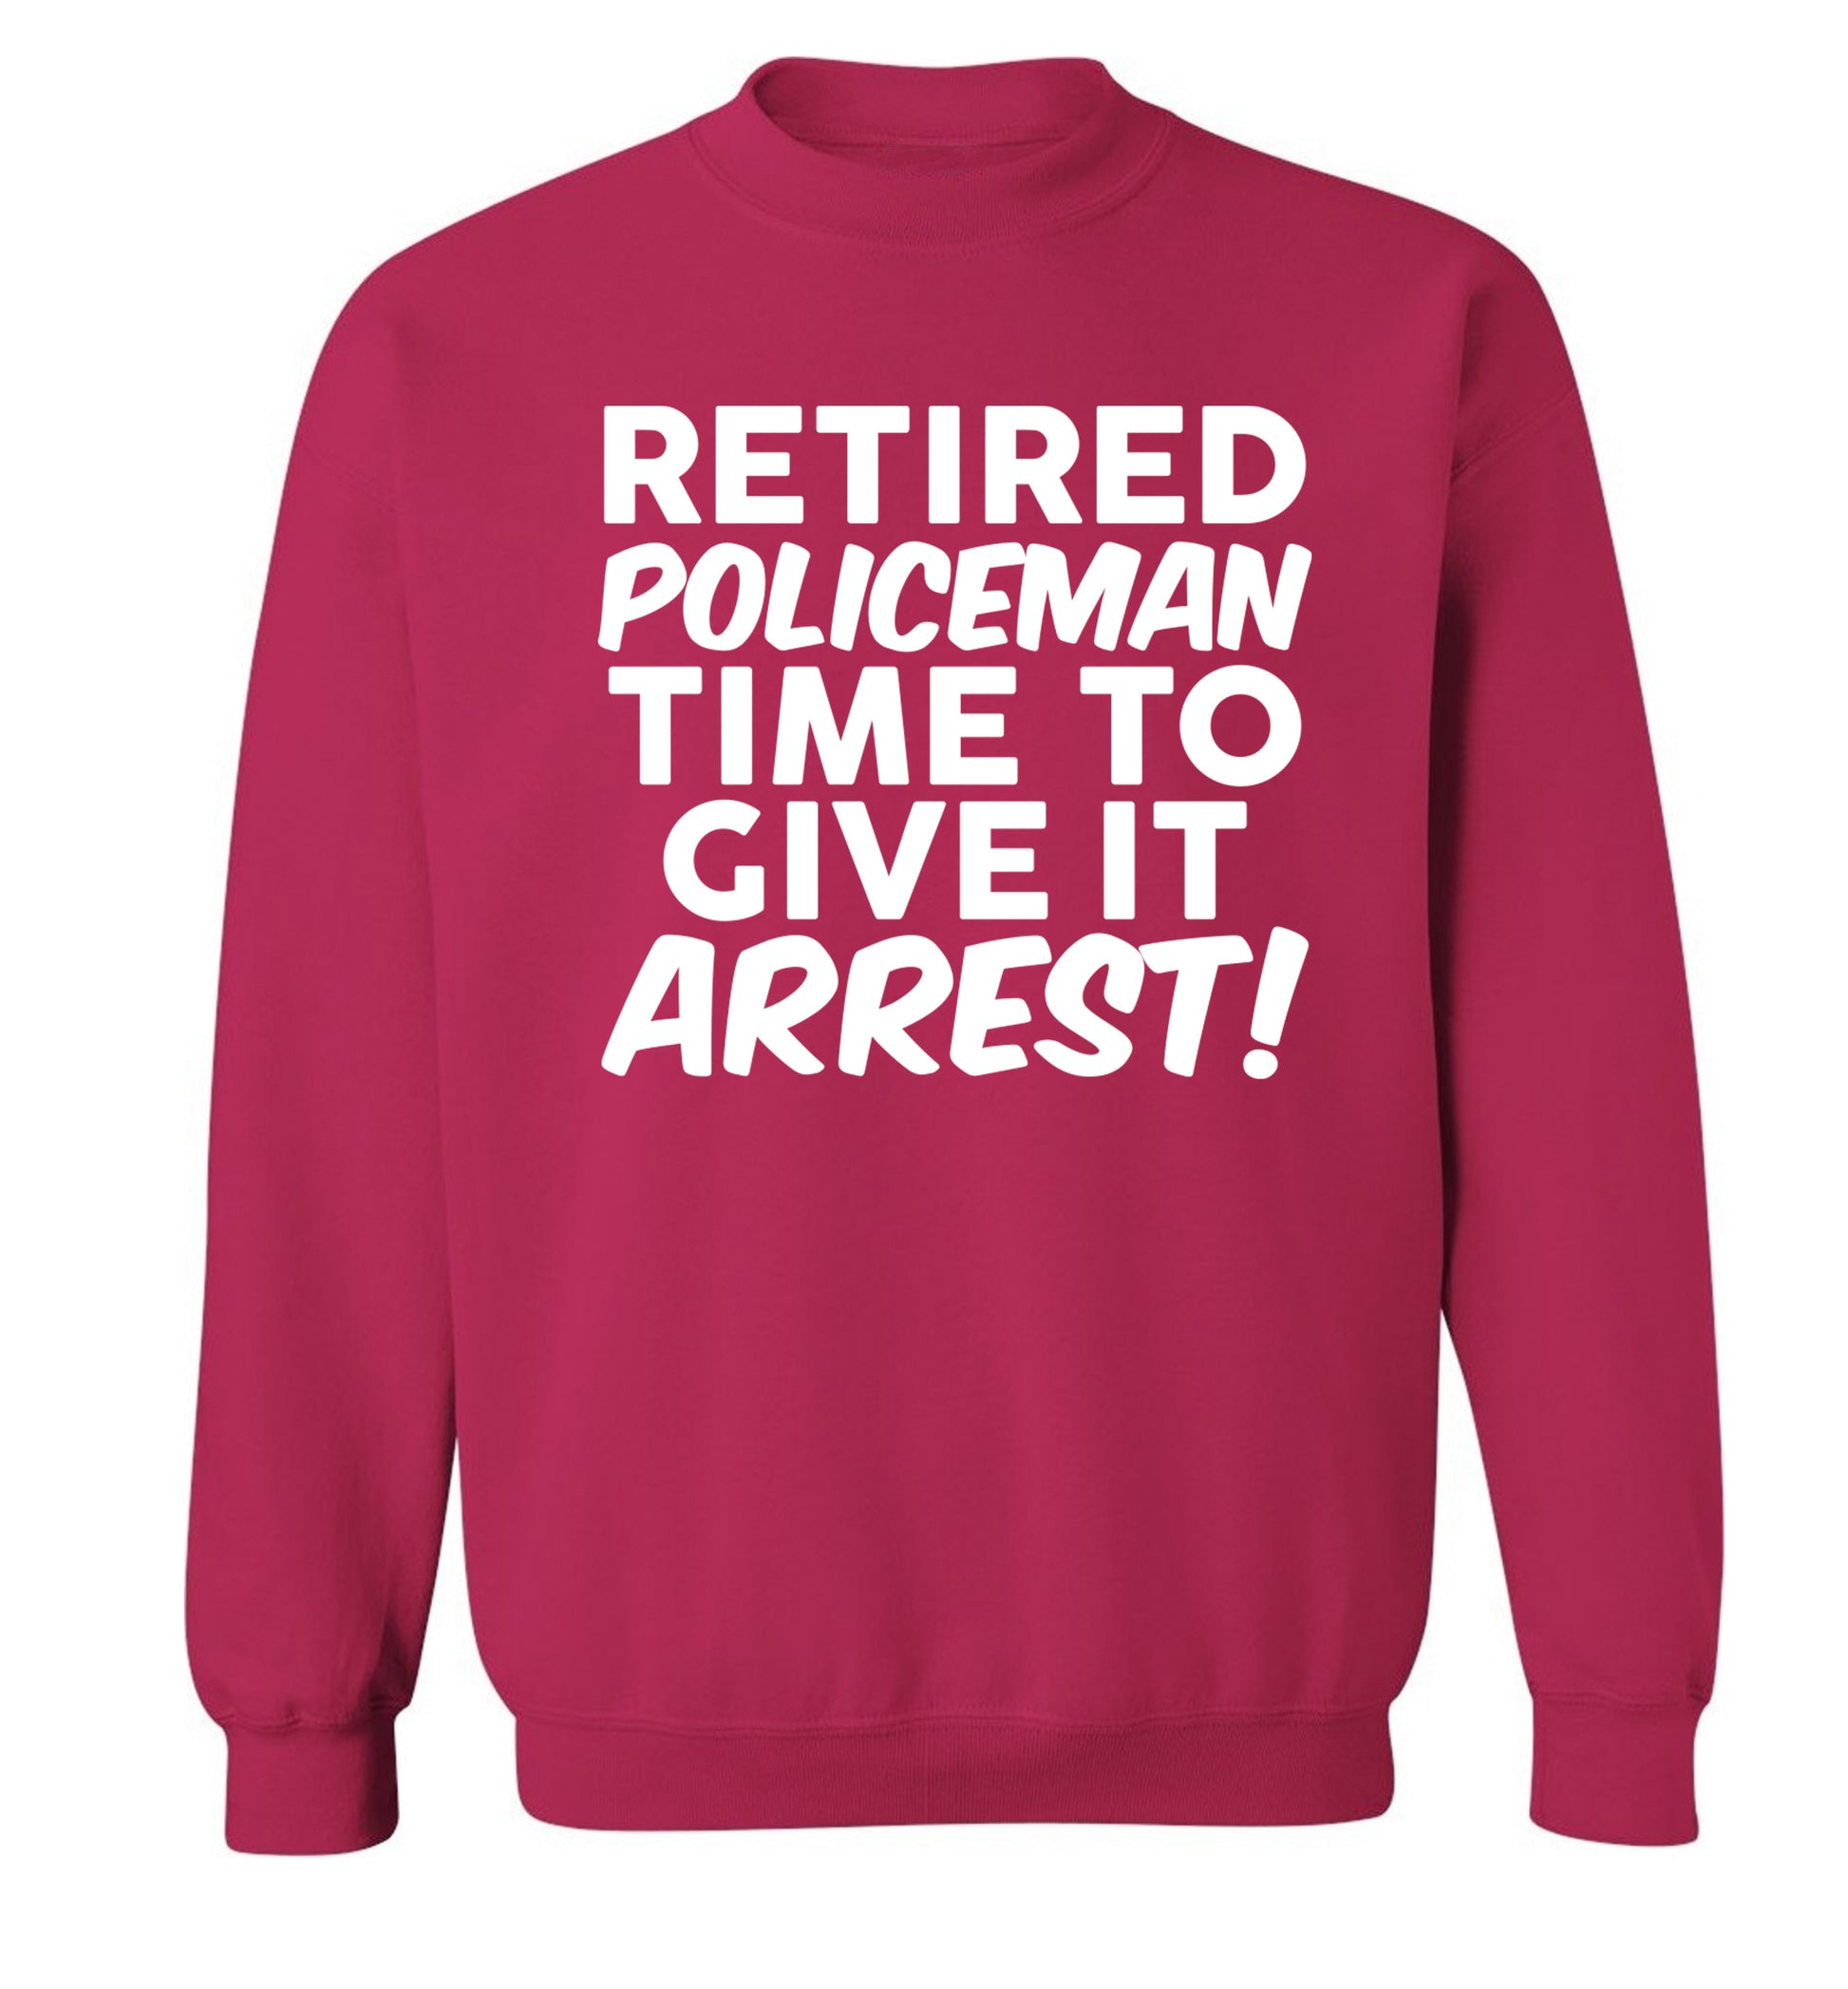 Retired policeman give it arresst! Adult's unisex pink Sweater 2XL